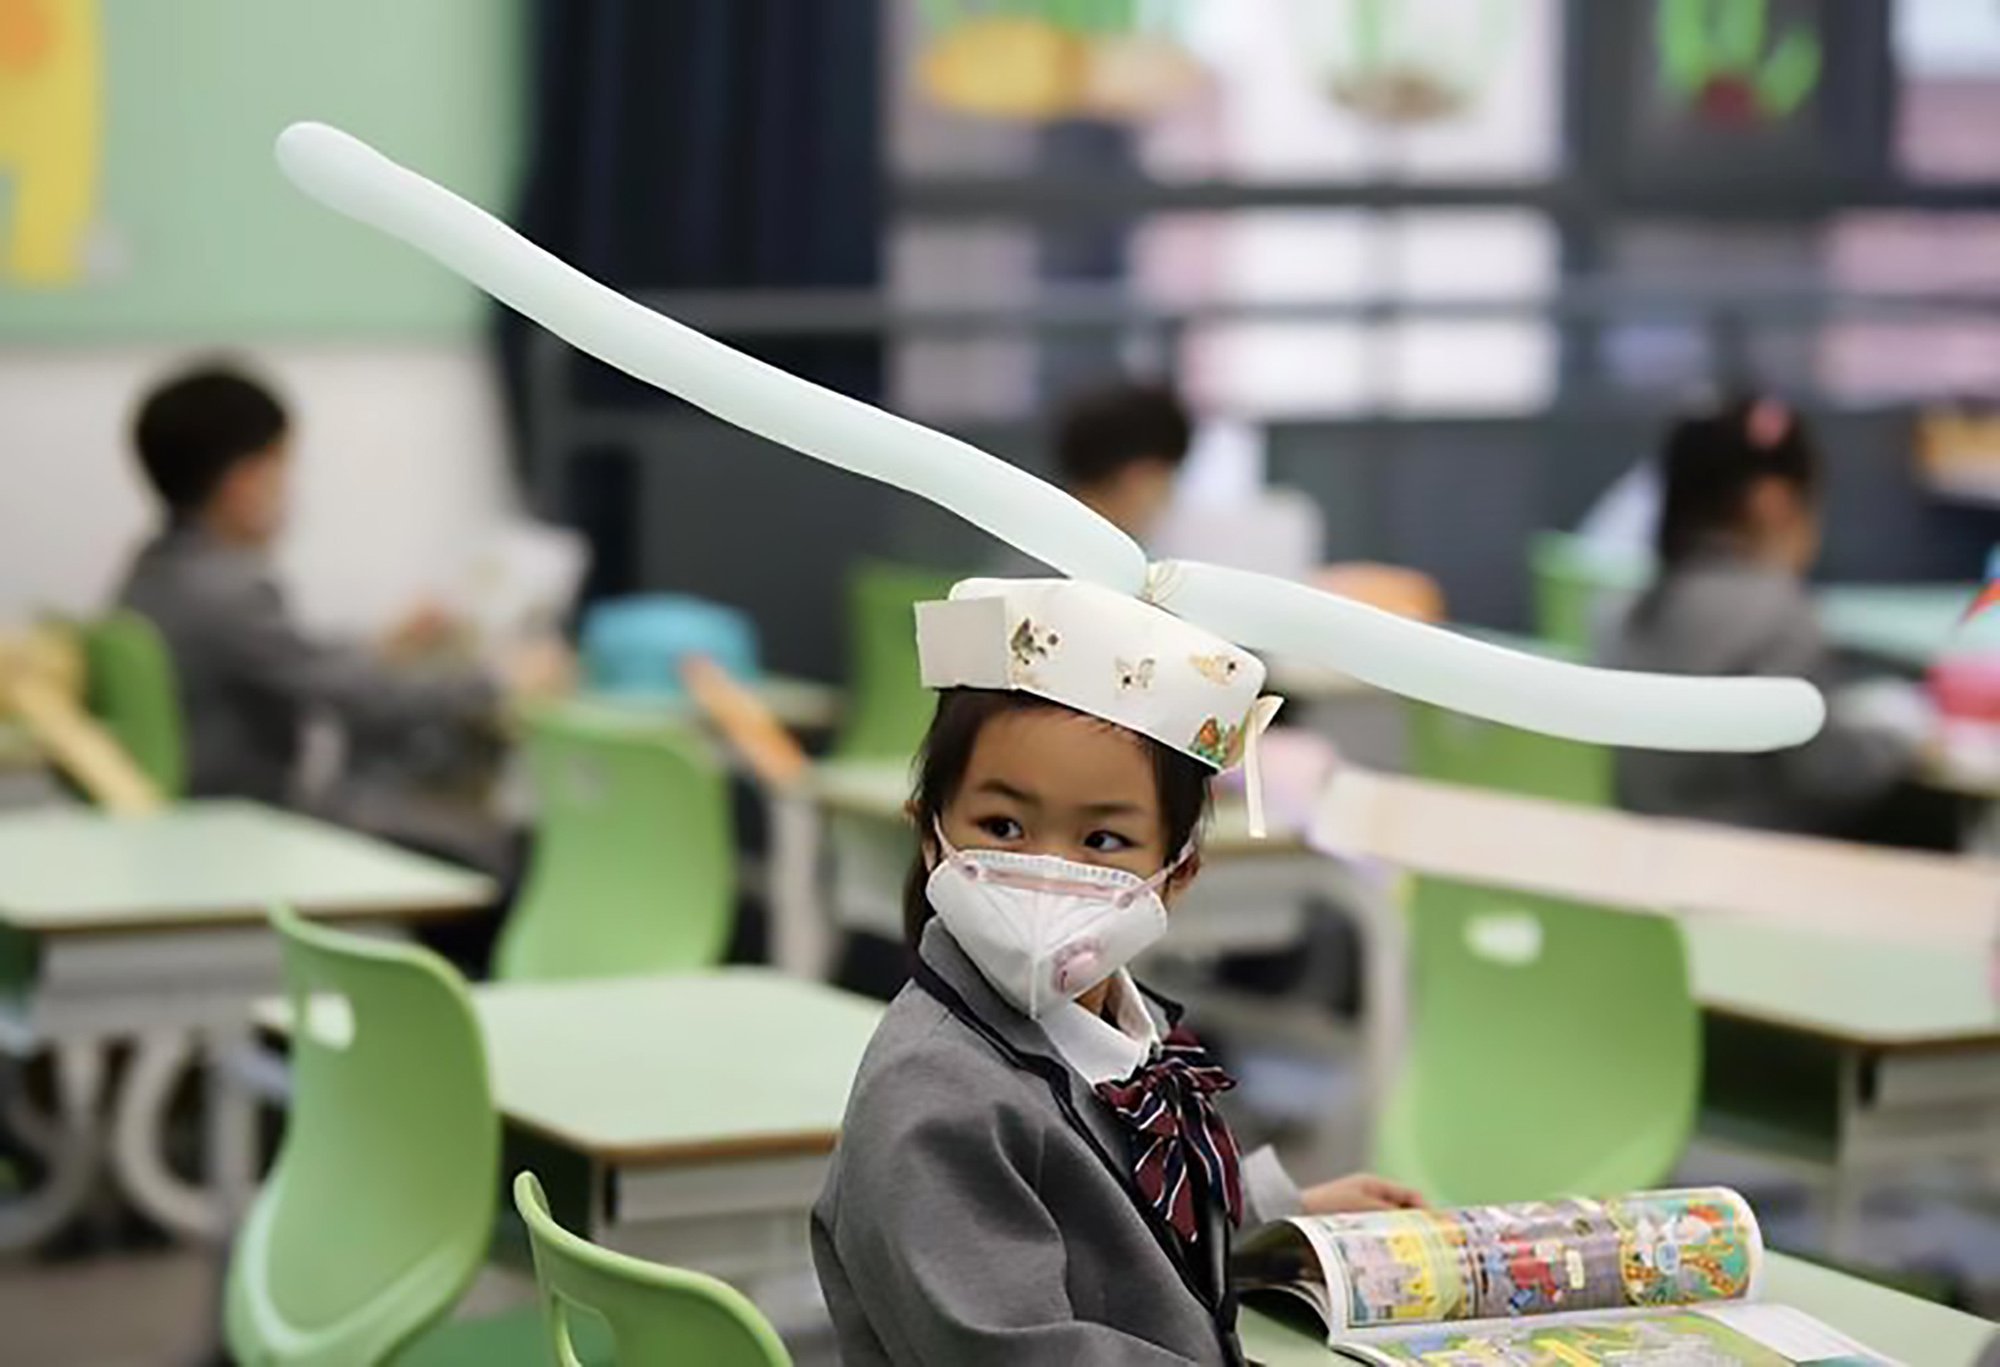 Kids in China Return To School With Home-made Social Distancing Hats